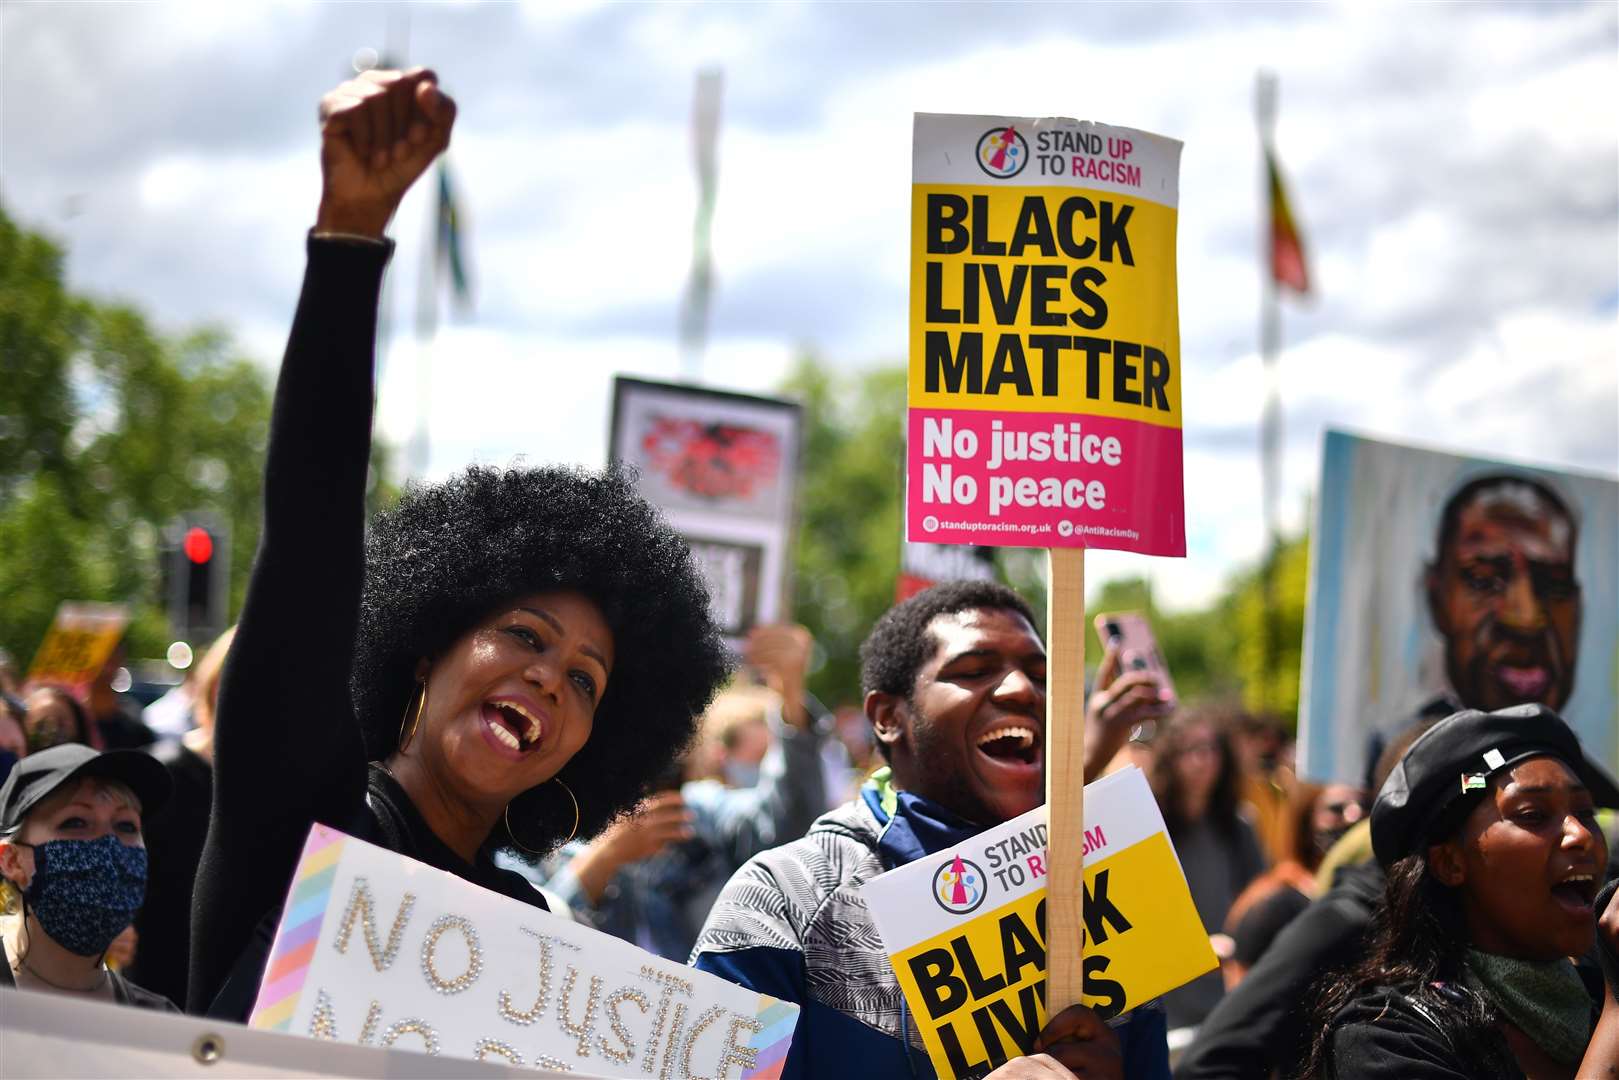 People taking part in a Black Lives Matter protest (Victoria Jones/PA Wire)